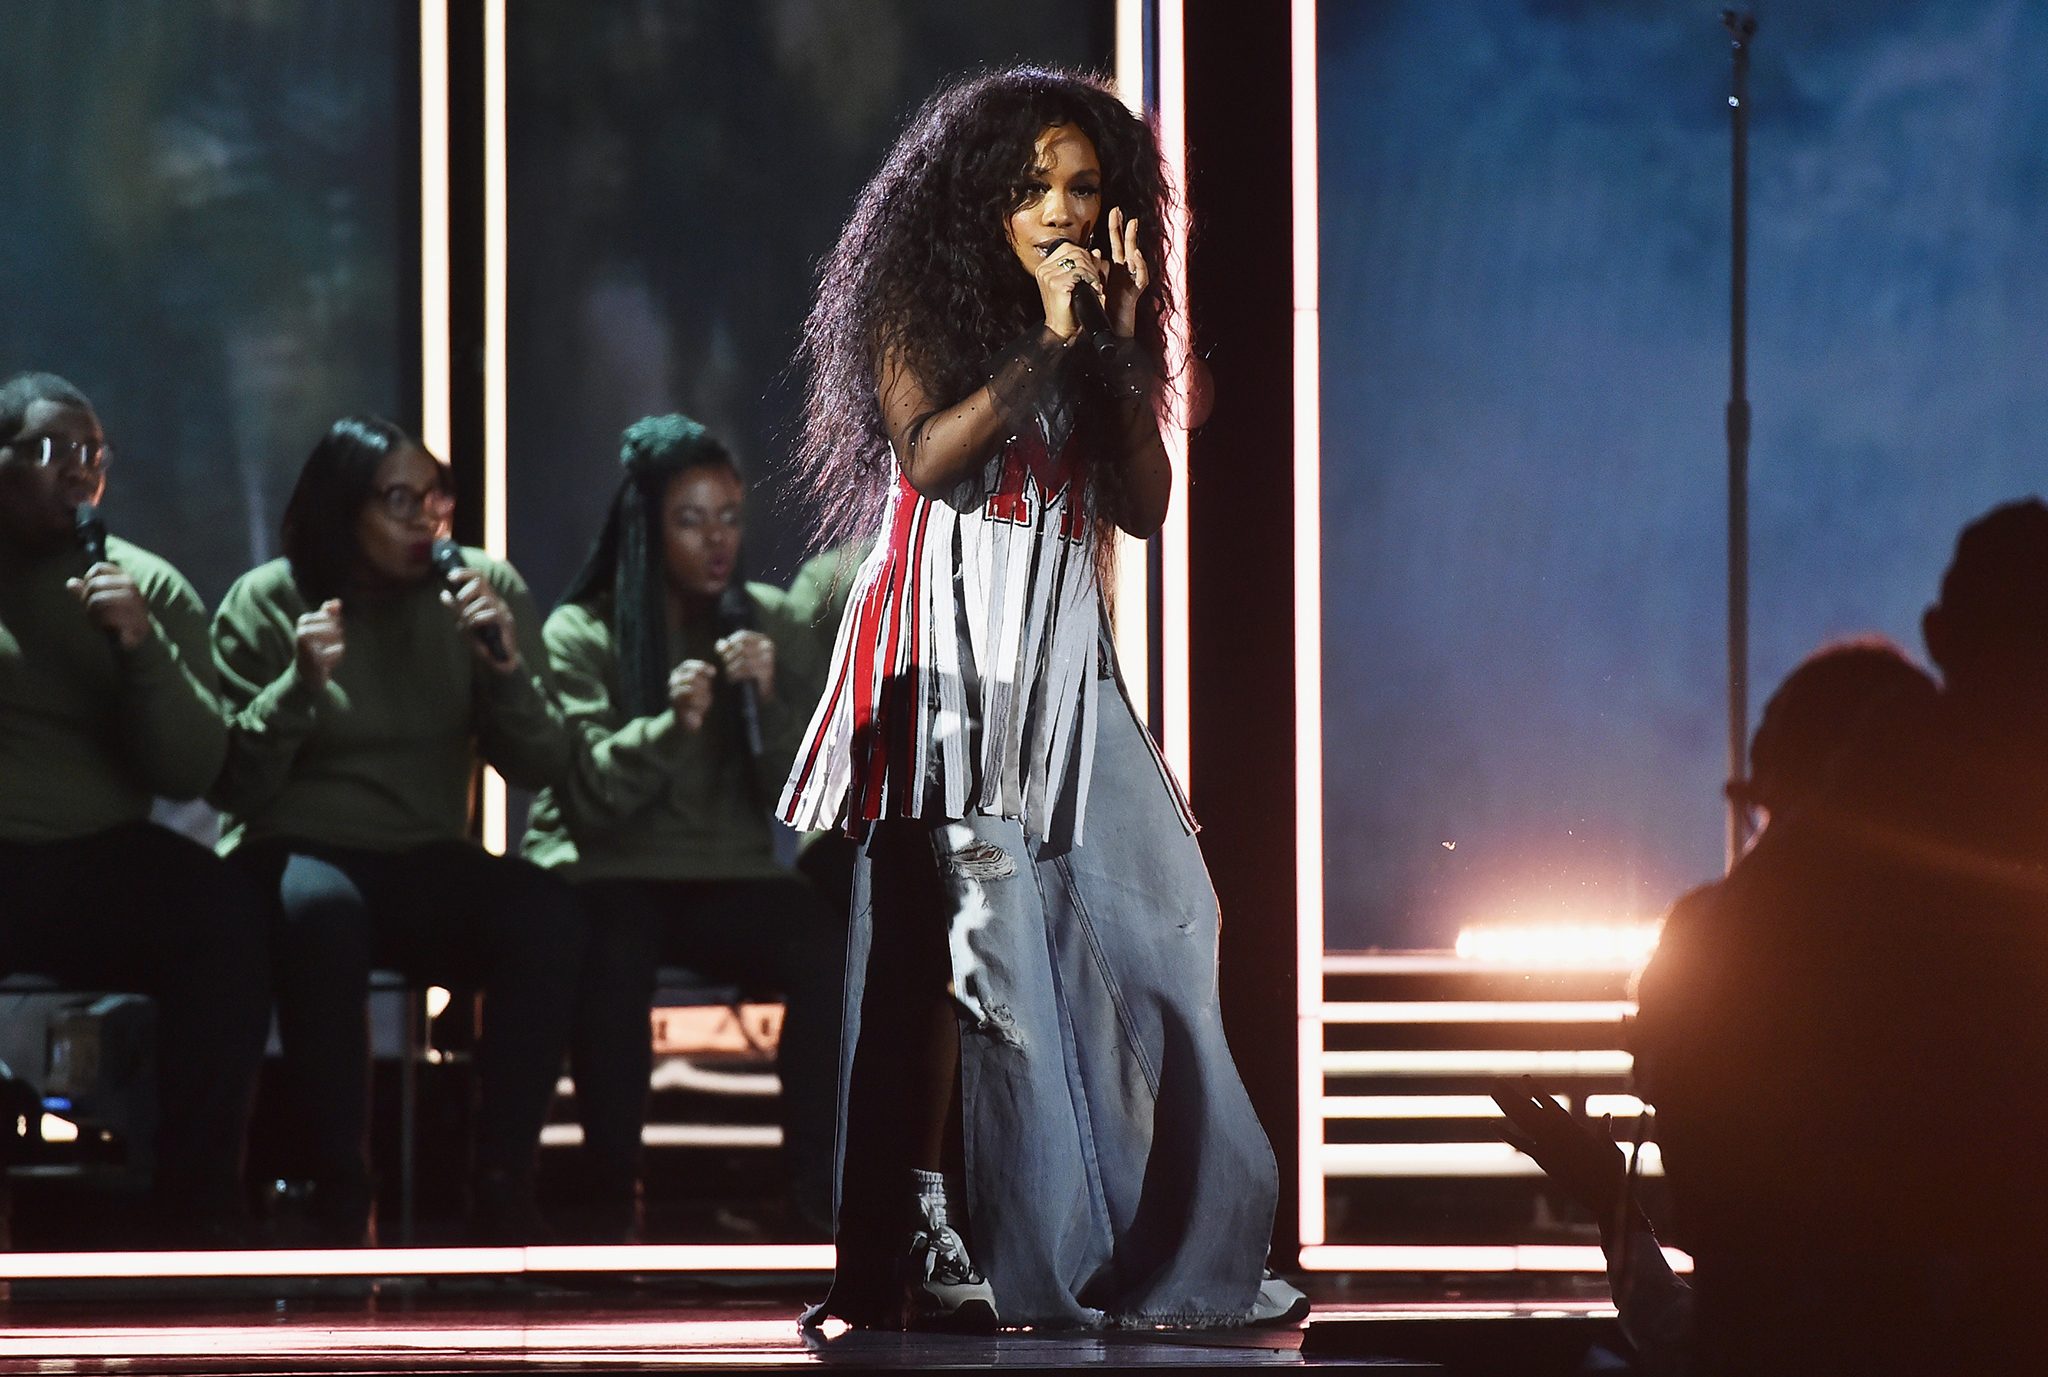 Recording artist SZA performs onstage during the 60th Annual Grammy Awards at Madison Square Garden on Jan. 28, 2018 in New York City.